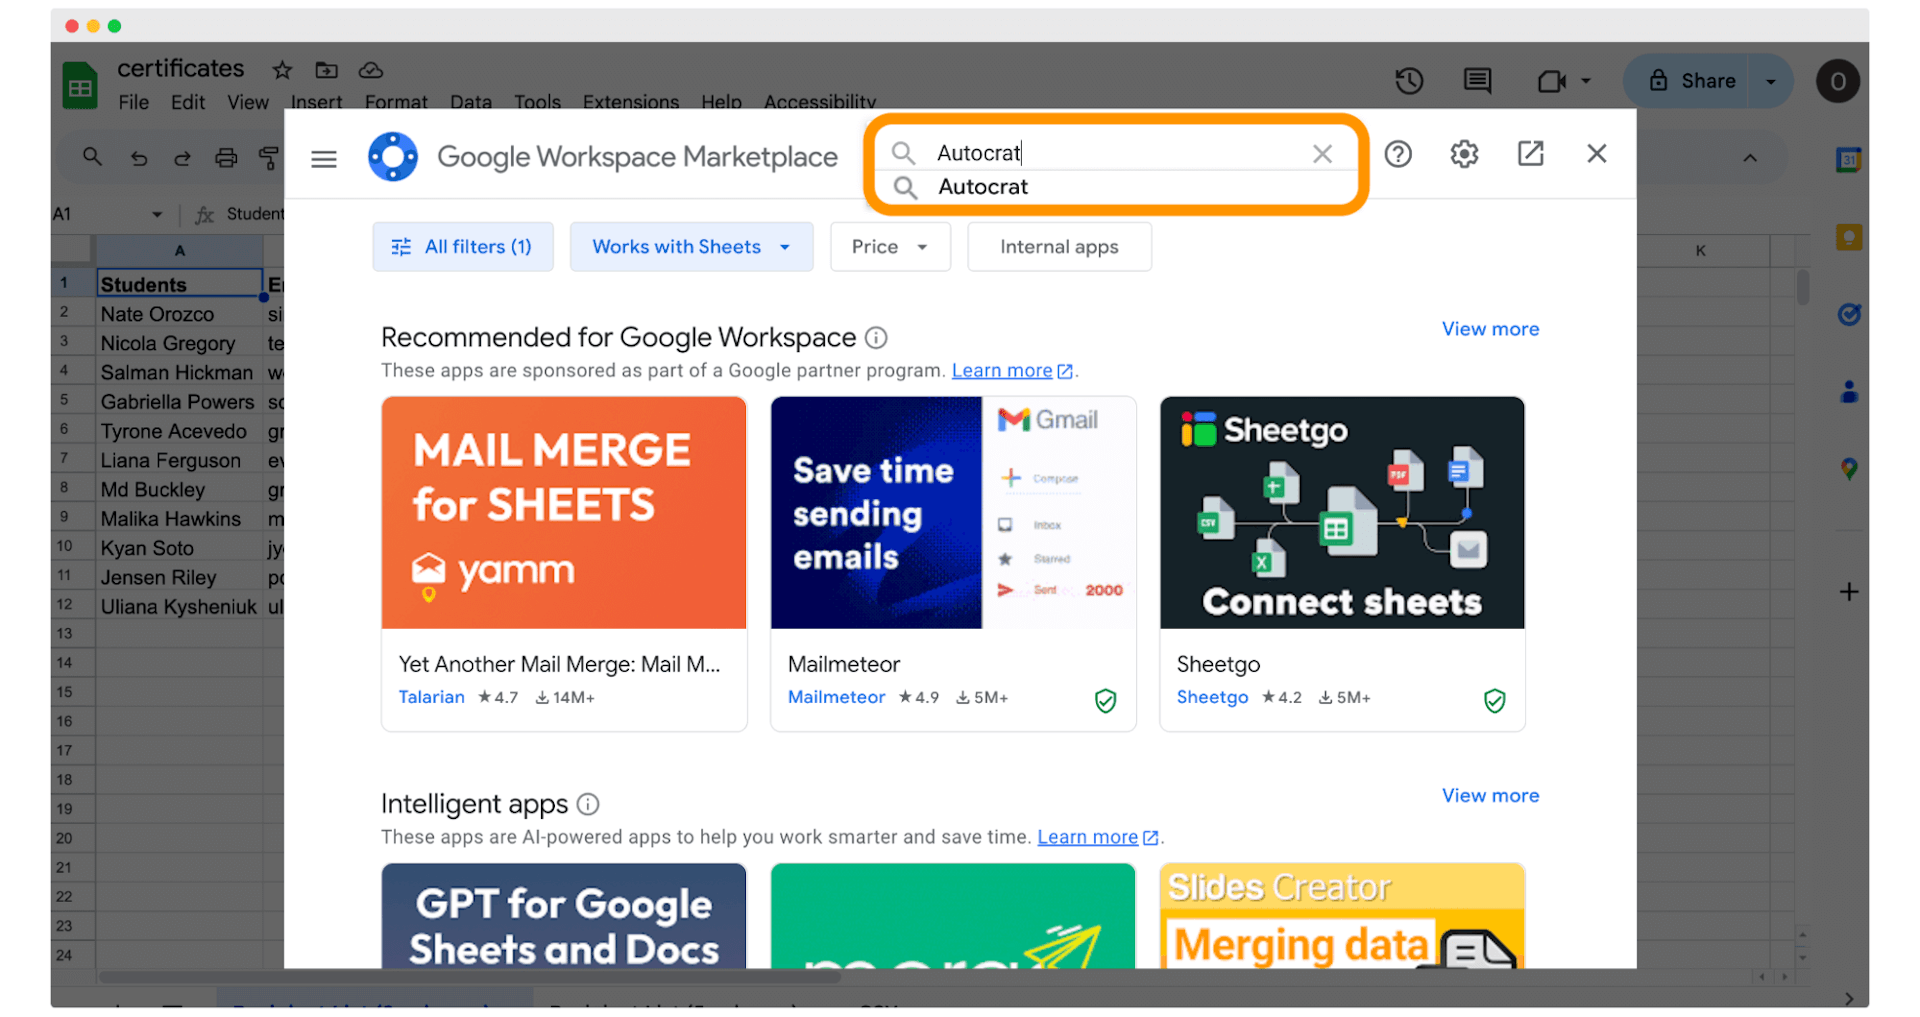 Google marketplace to install AutoCrat add-on for Google Sheets.